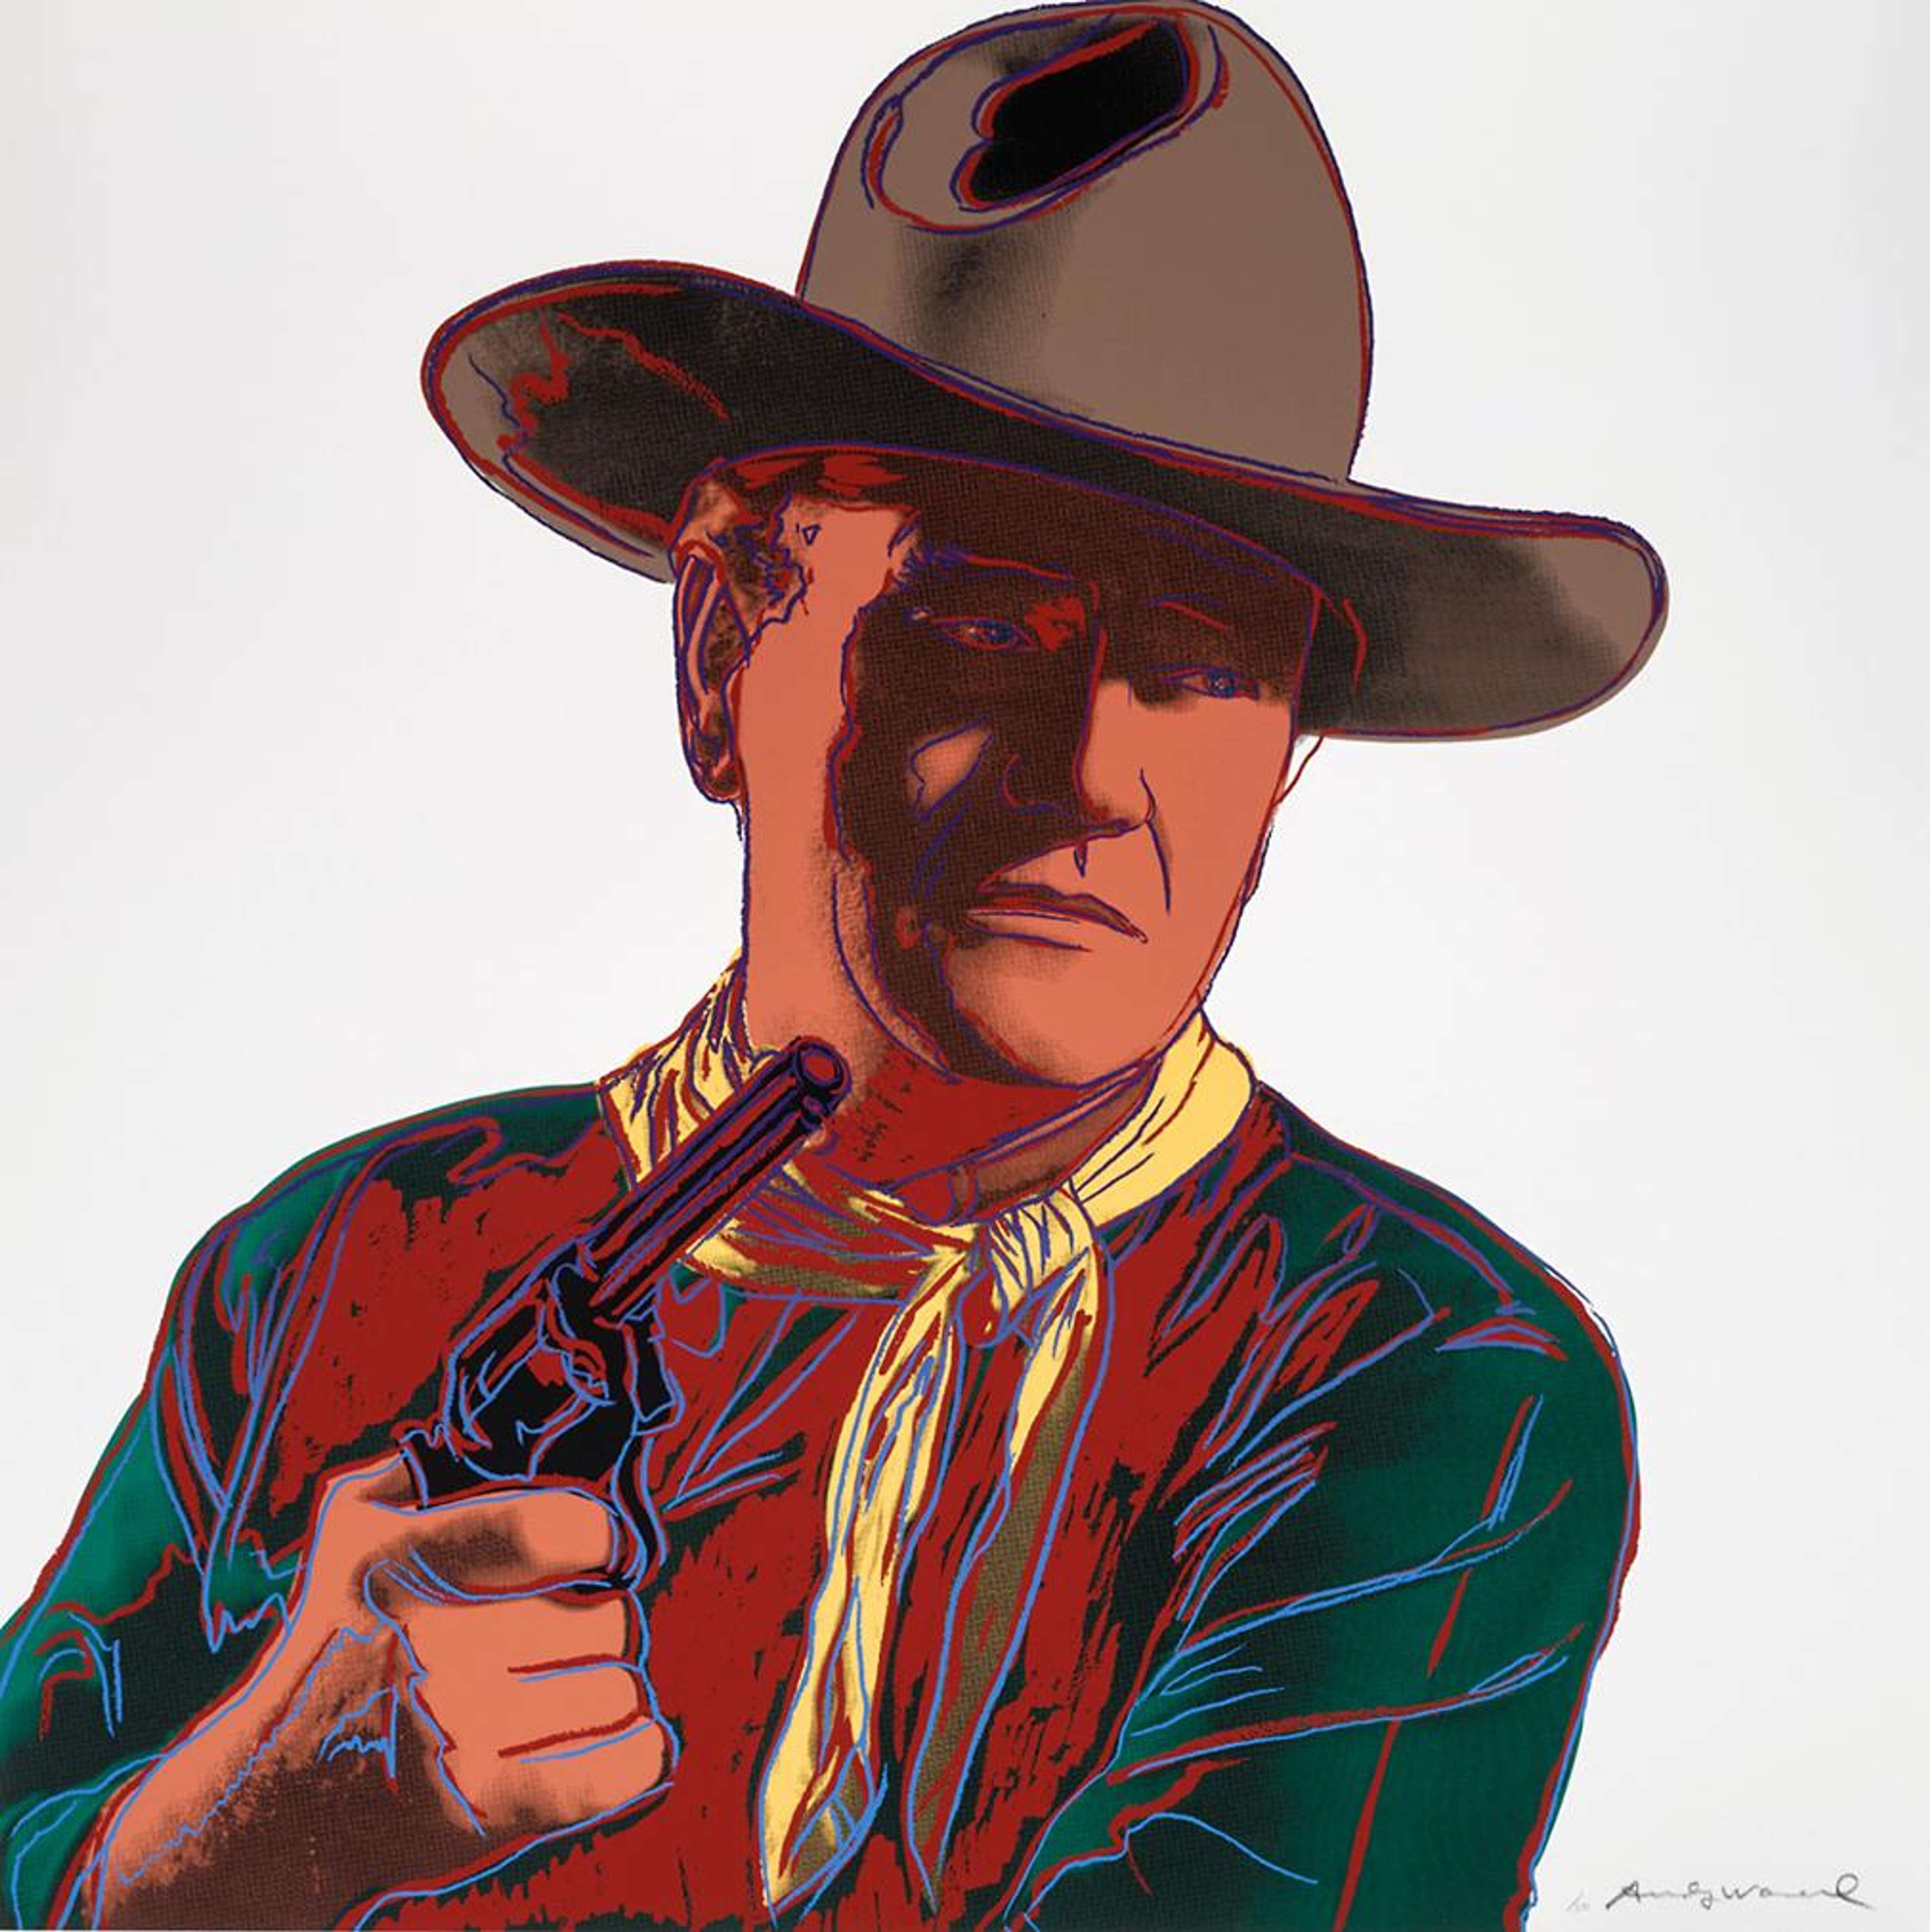 A screenprint by Andy Warhol depicting John Wayne in bright colours and vivid outlines against a white background. Wayne is pictured in a Stetson hat, pointing a gun to the right of the composition.